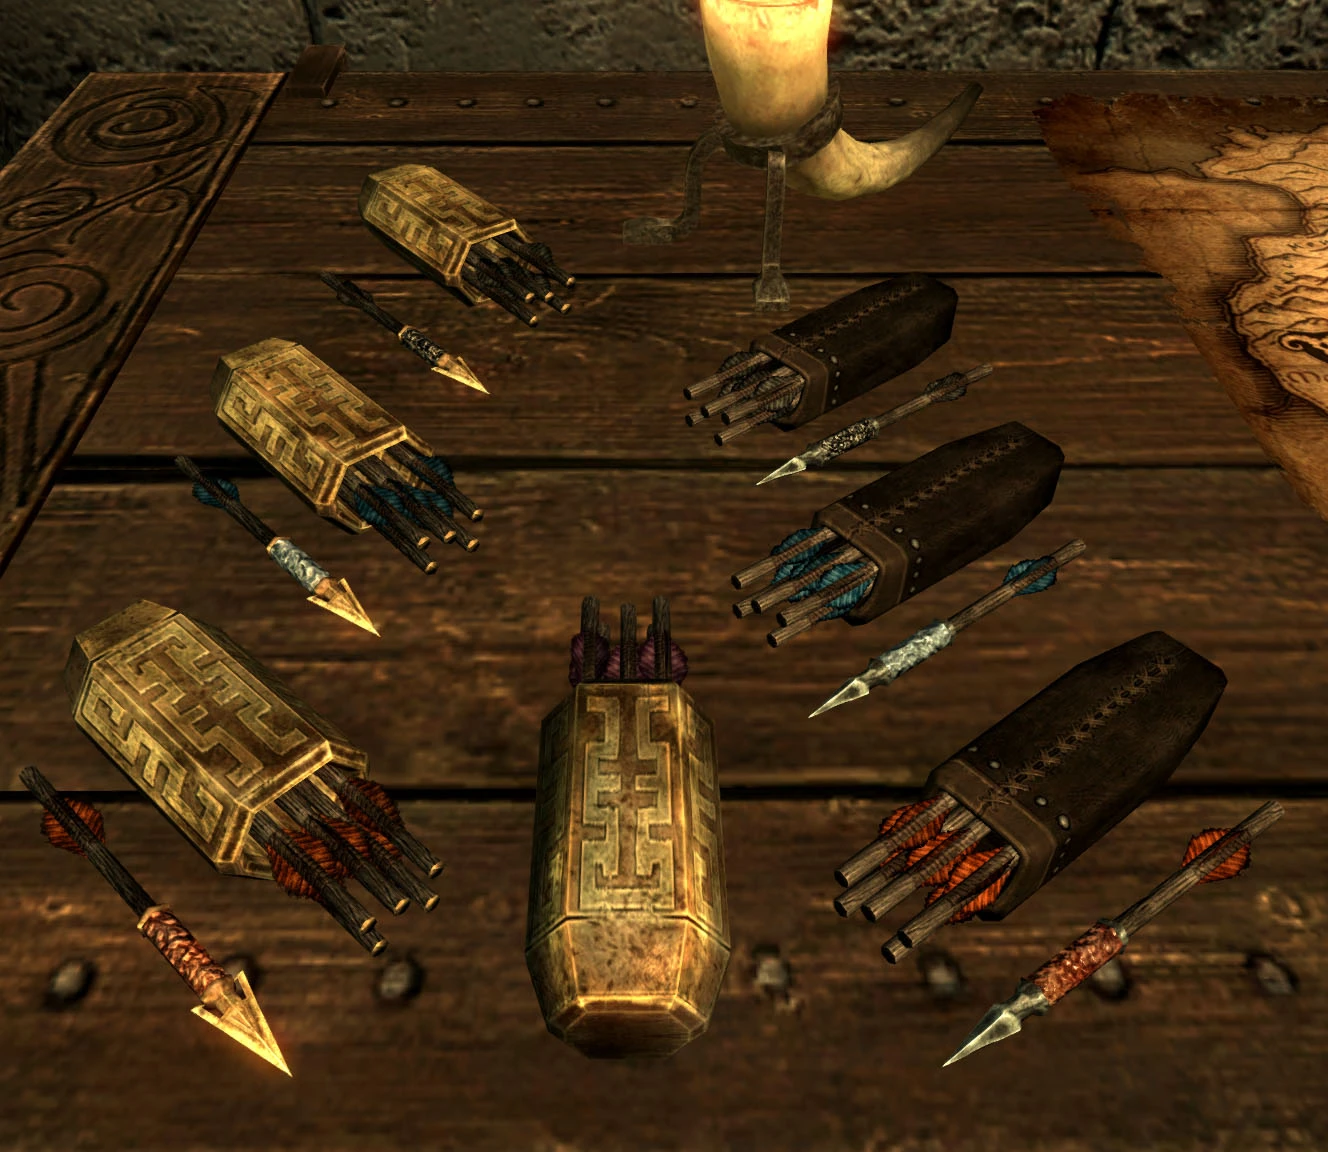 Dawnguard Crossbow Explosive Bolts Visualized At Skyrim.